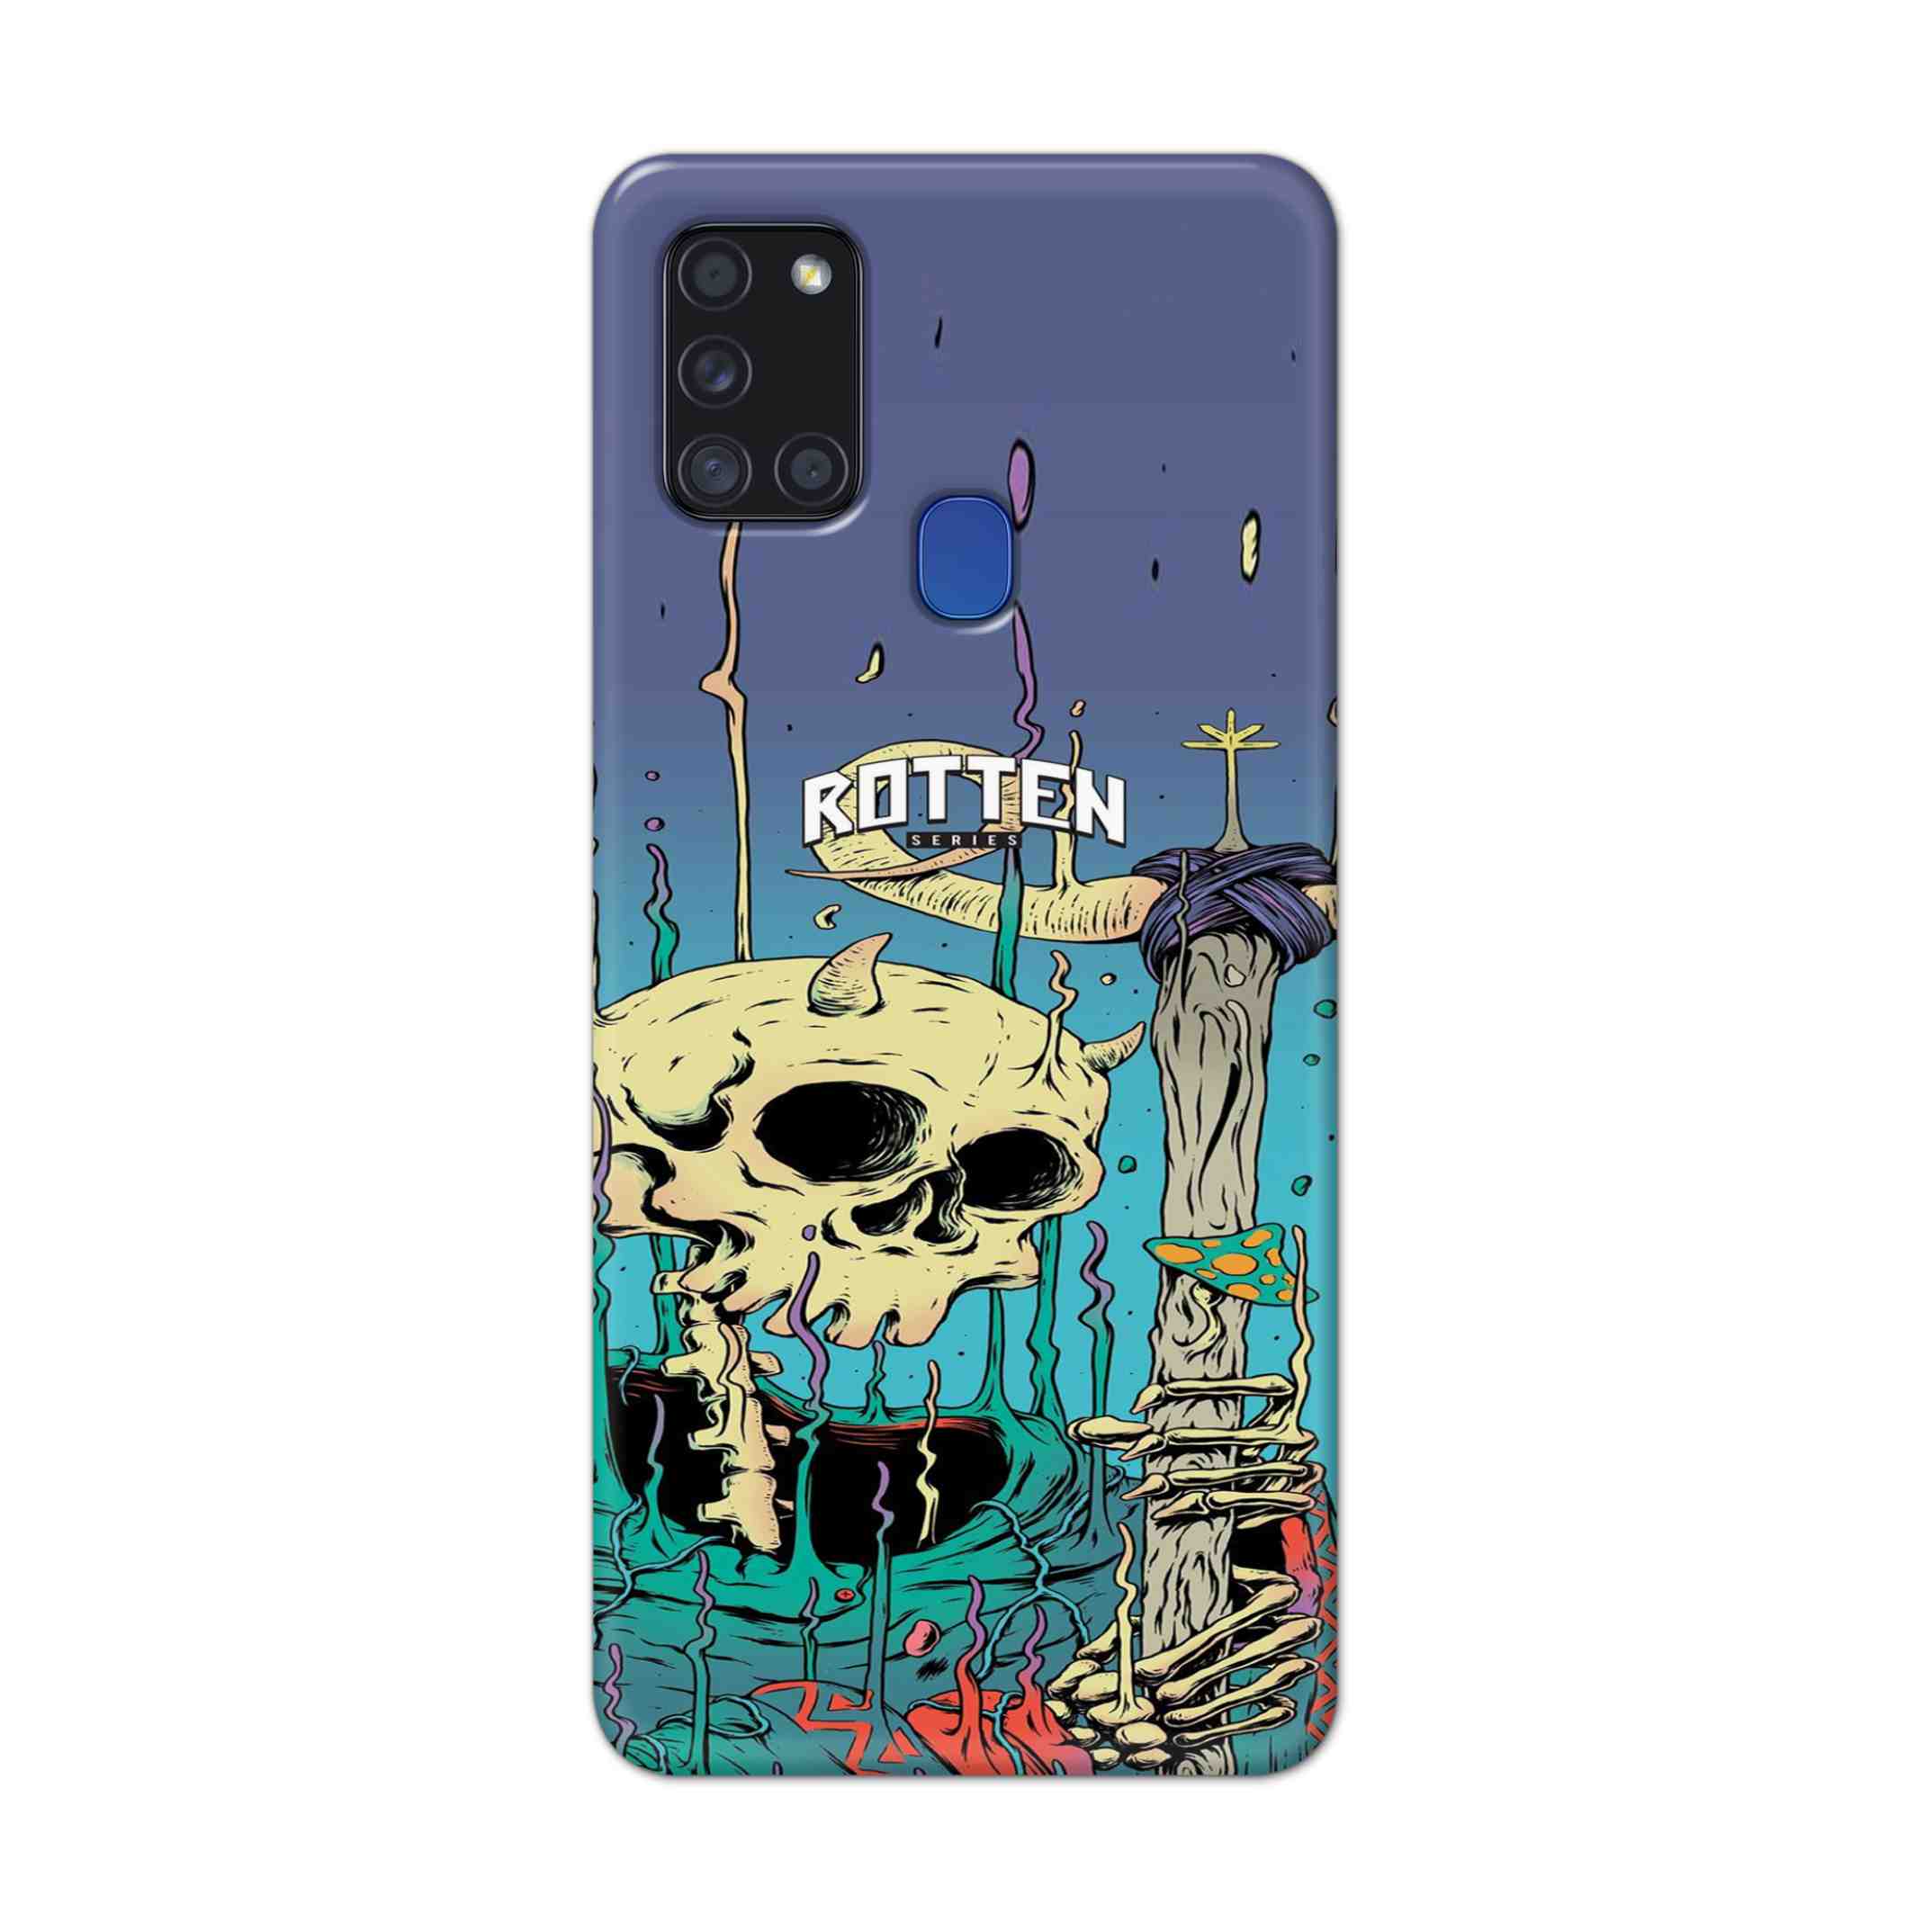 Buy Skull Hard Back Mobile Phone Case Cover For Samsung Galaxy A21s Online